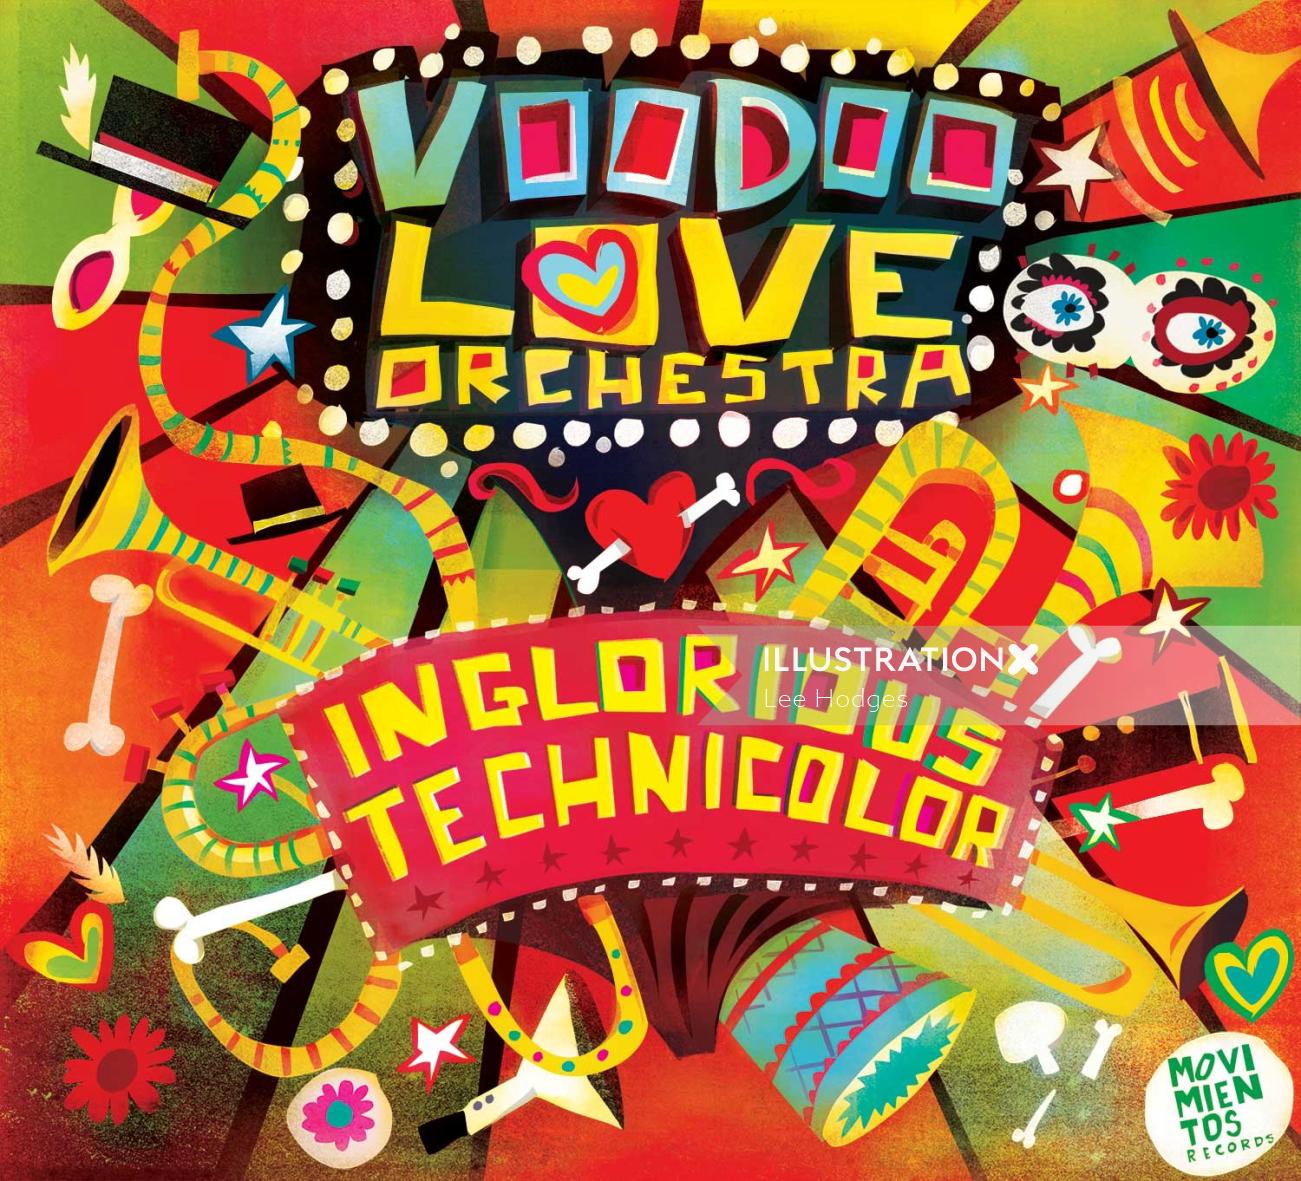 Voodoo Love Orchestra album art
by Lee Hodges